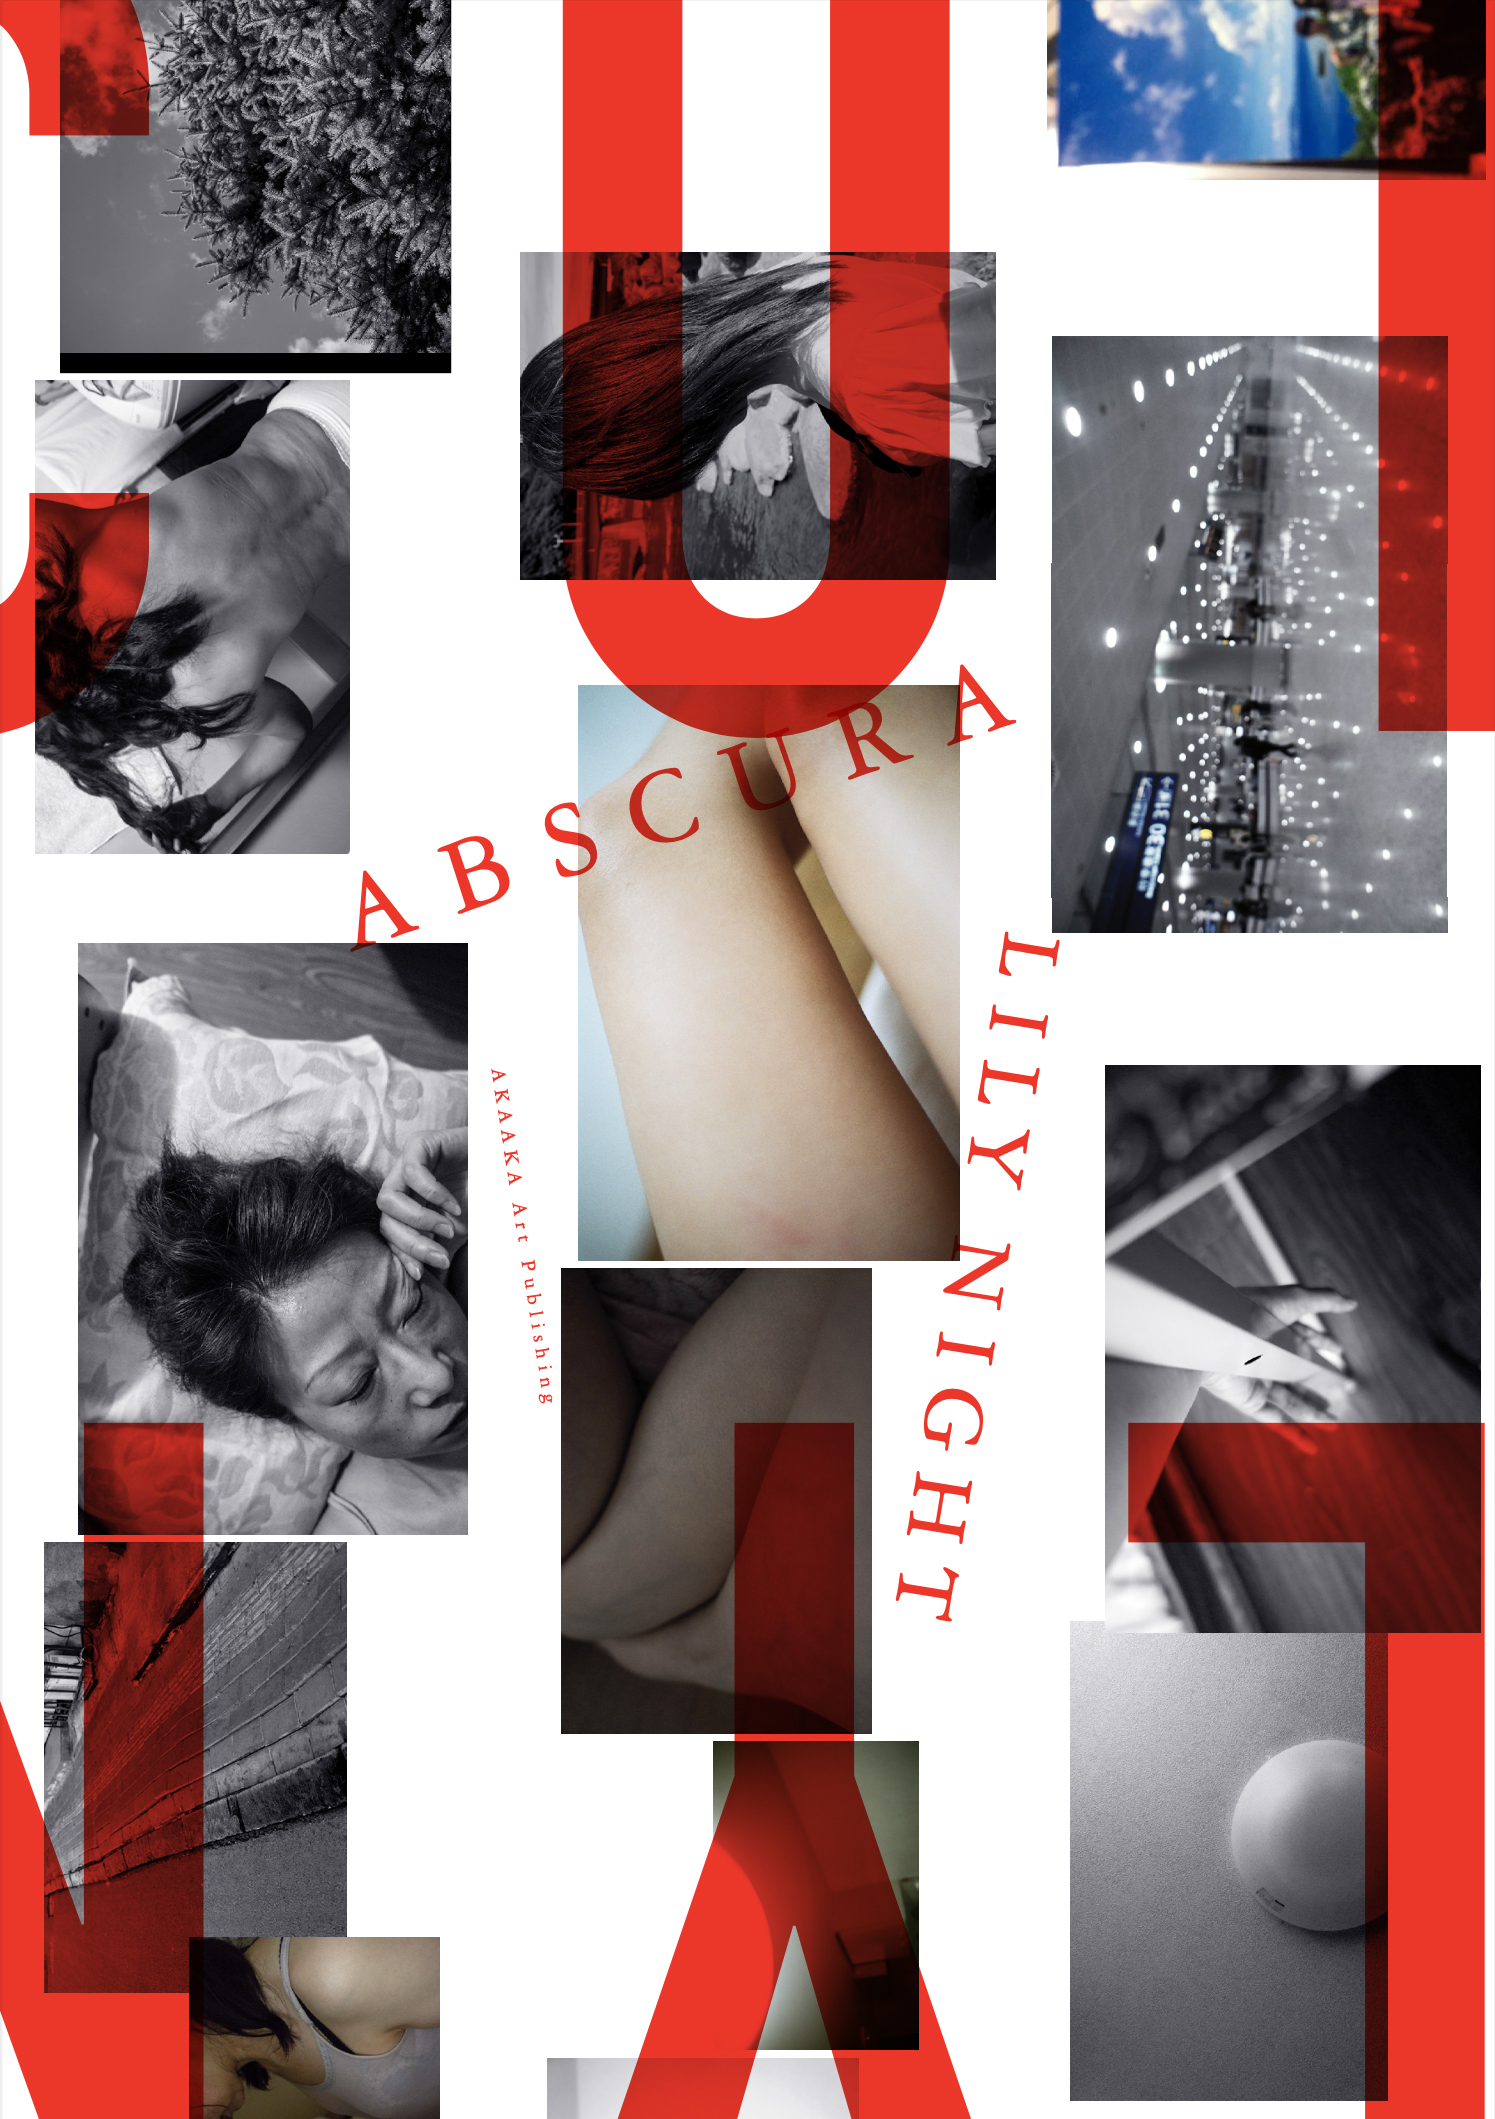 ABSCURA_cover.jpg